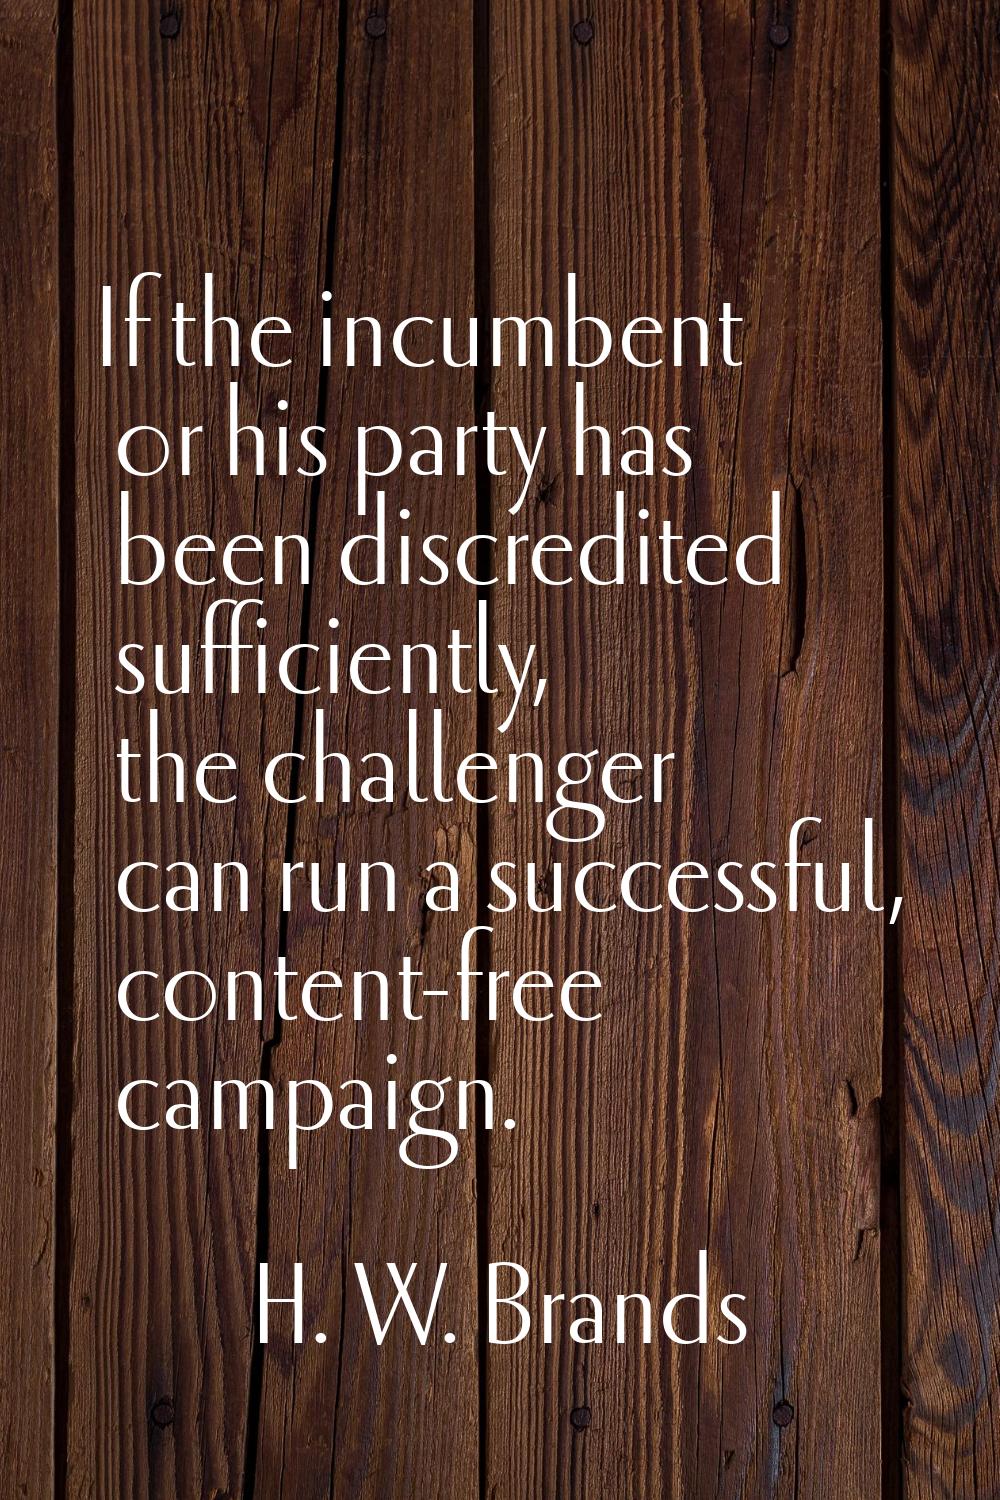 If the incumbent or his party has been discredited sufficiently, the challenger can run a successfu